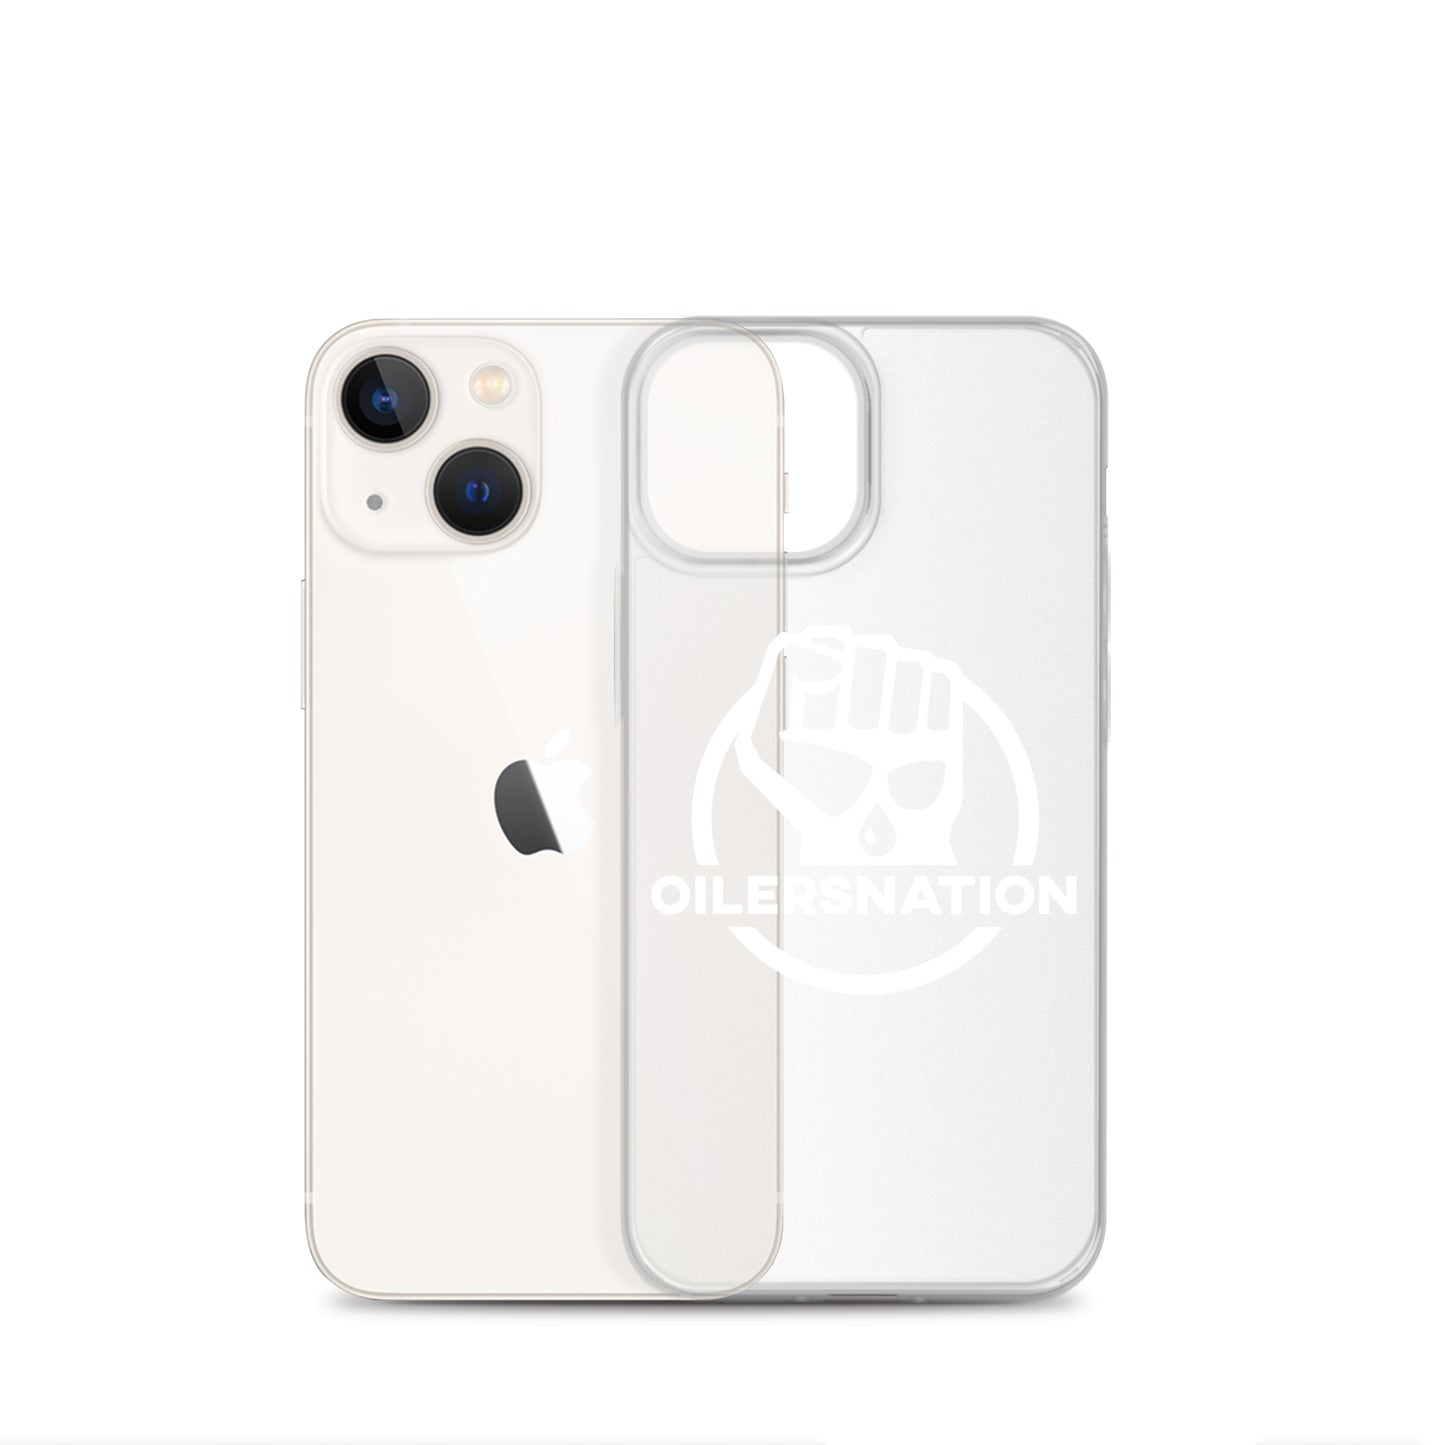 Oilersnation - Clear Case for iPhone® White Logo